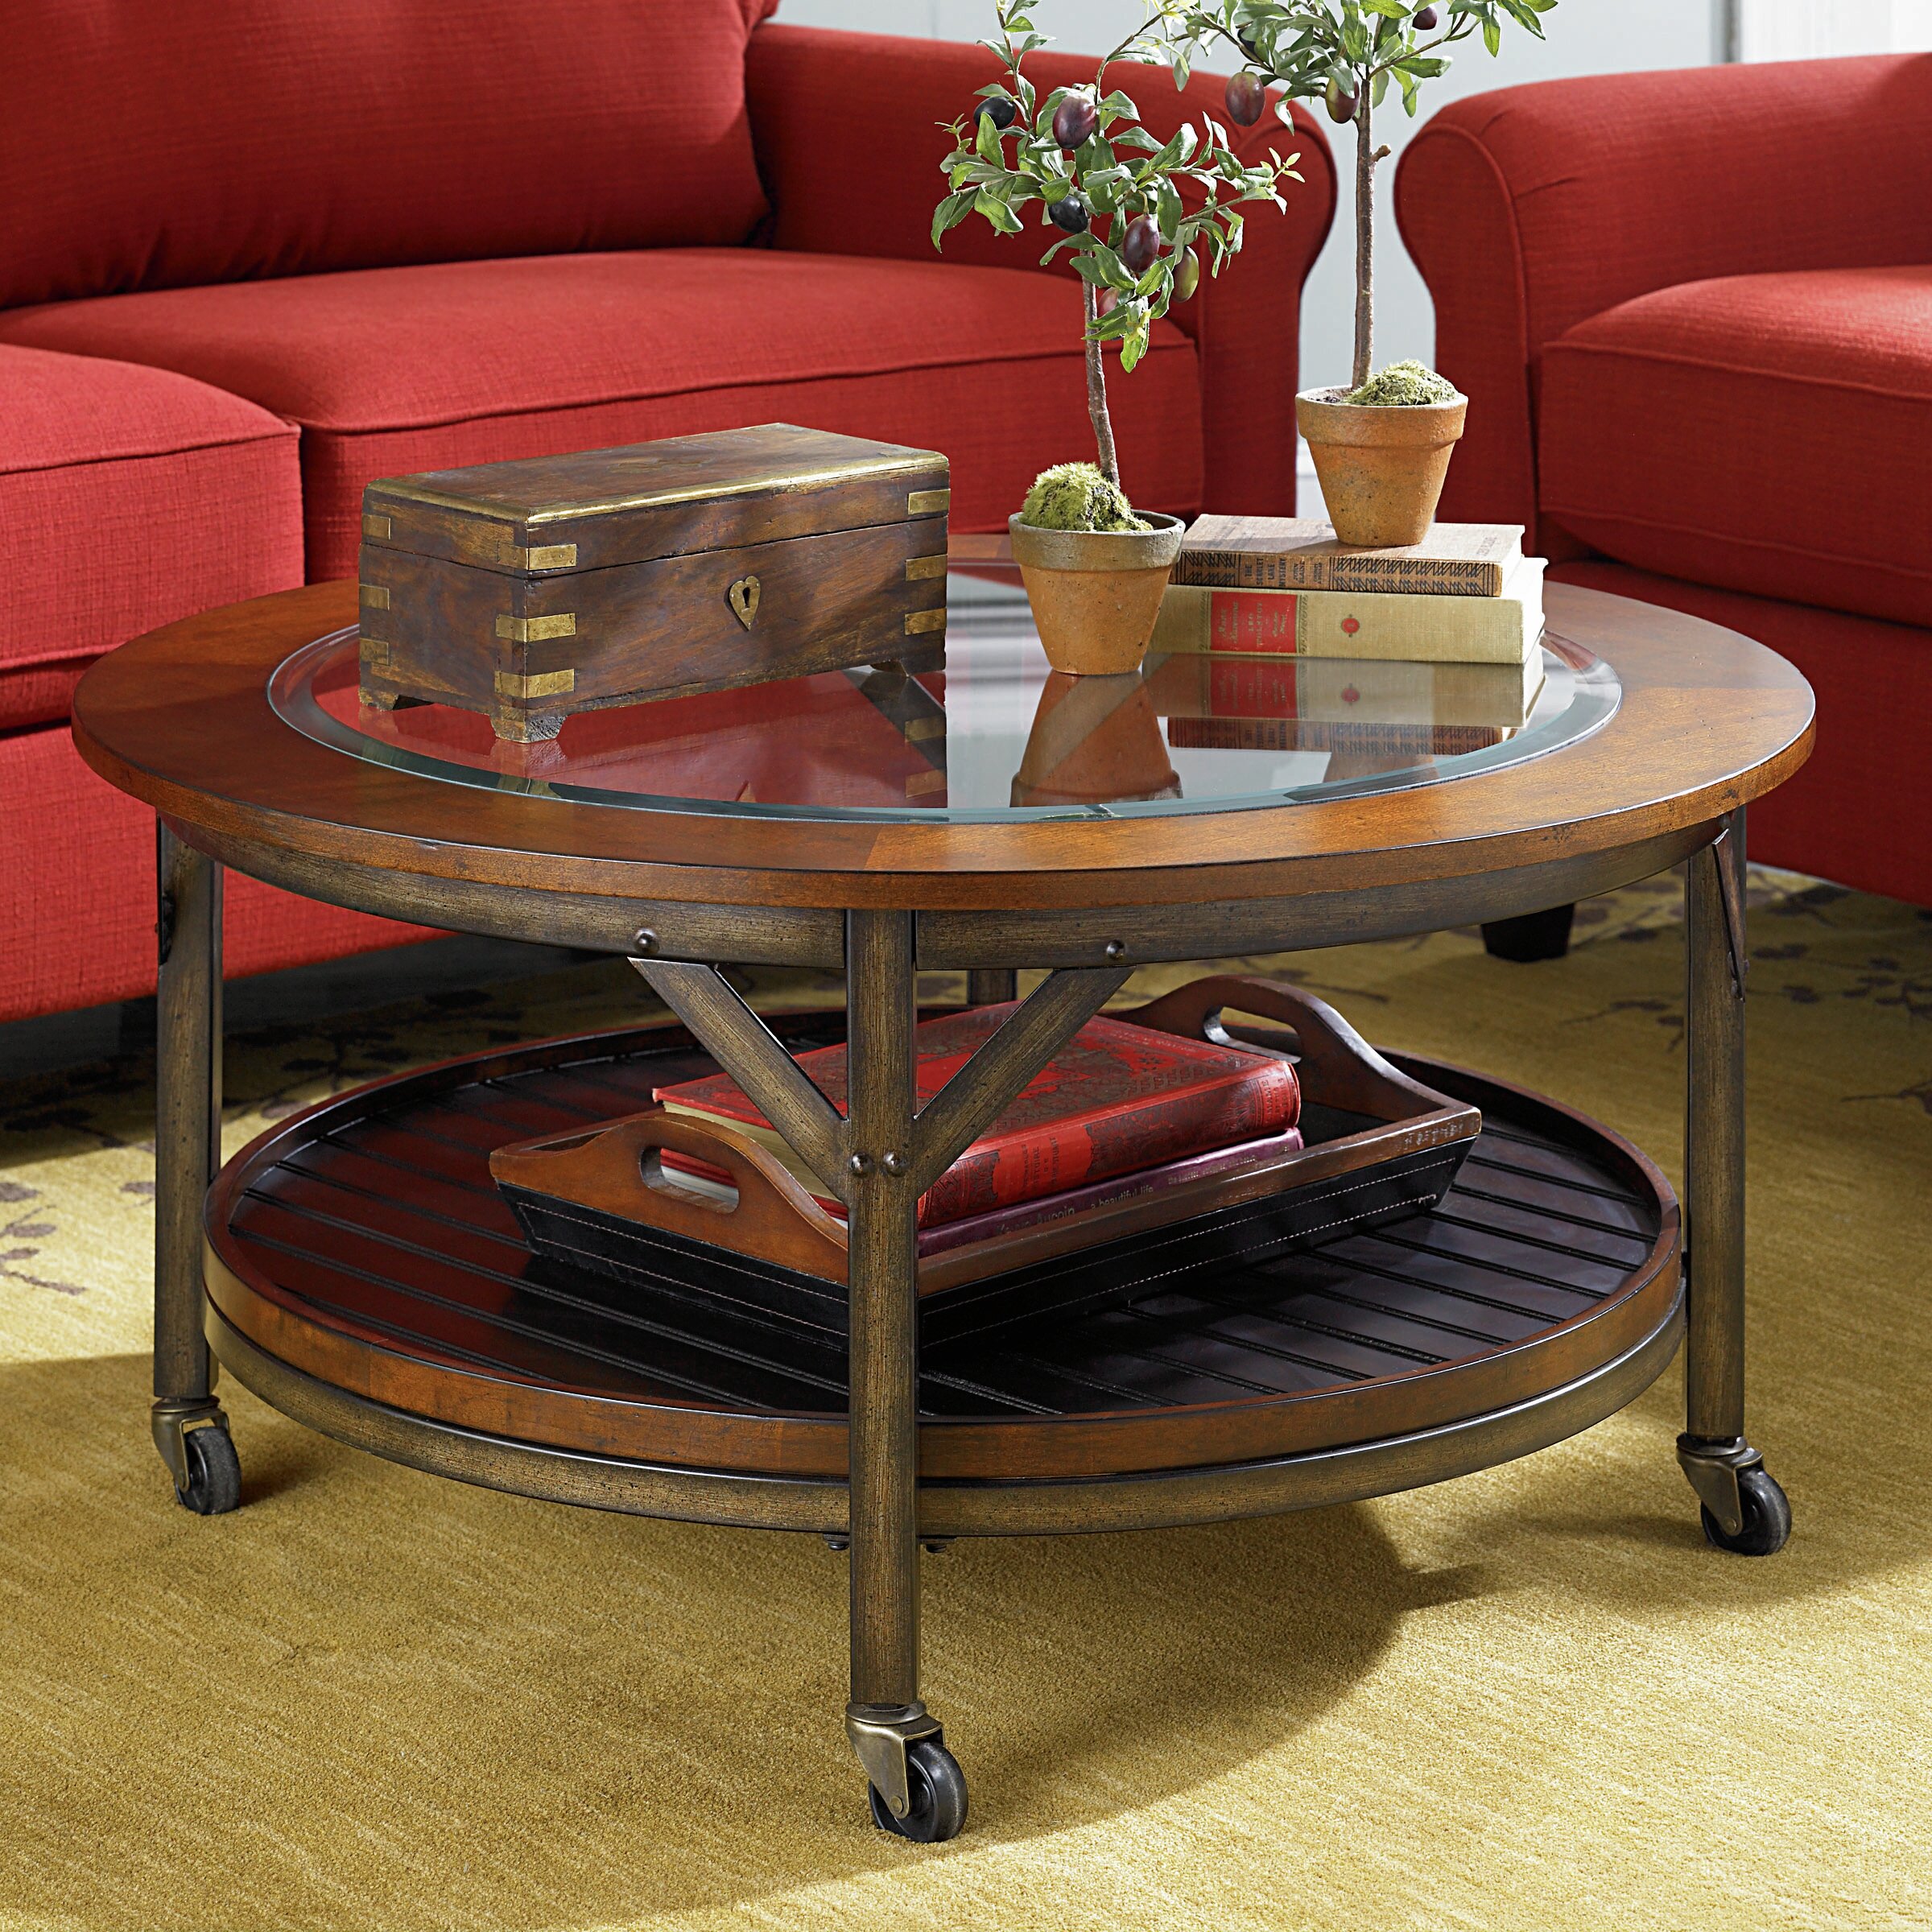 The Astonishingly Elegant Wayfair Coffee Table: Elevate Your Living Space with Unmatched Style and Functionality!